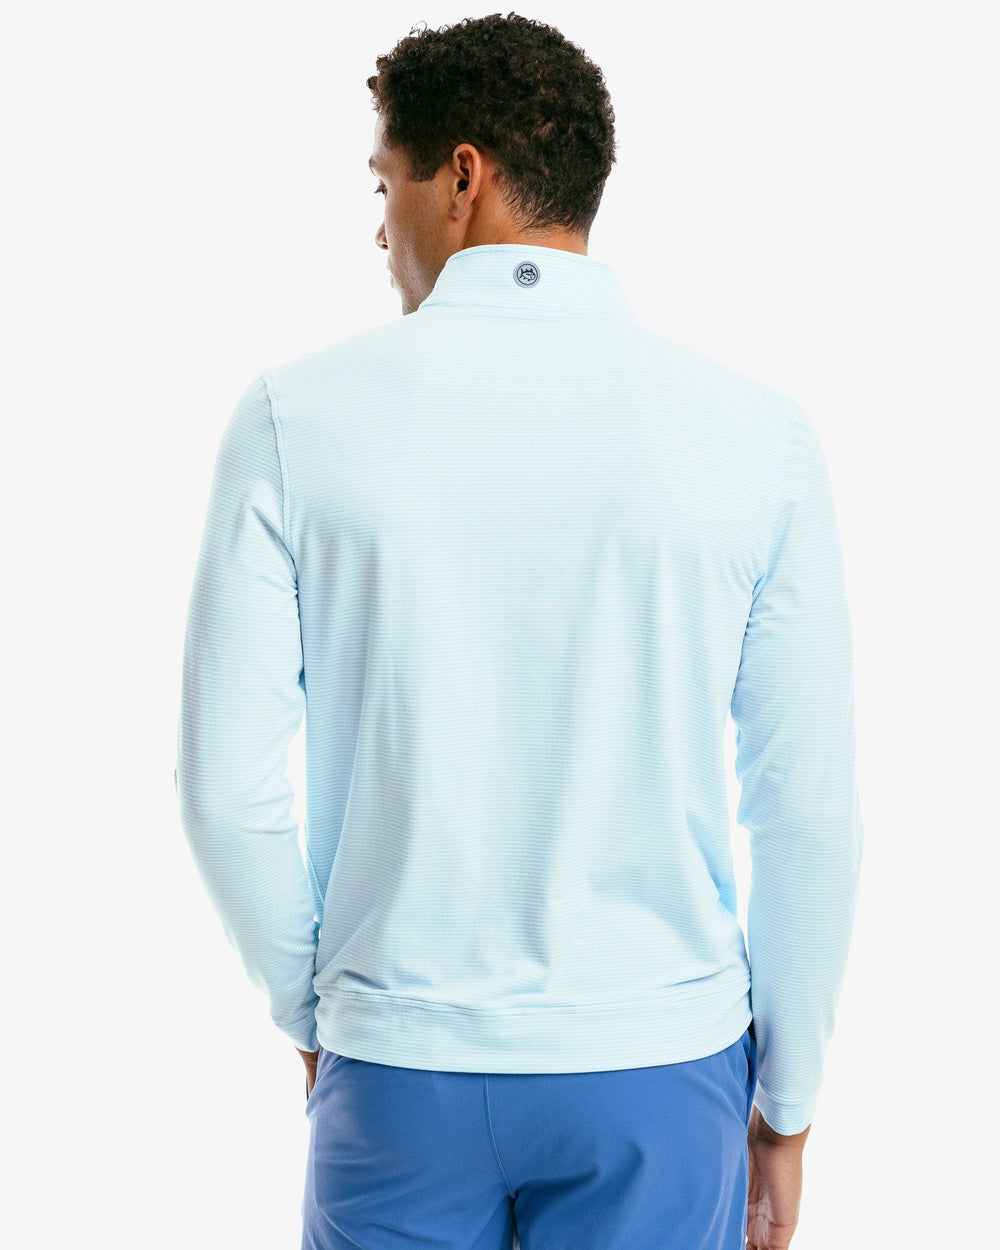 The back of the Men's Cruiser Heather Micro Striped Performance Quarter Zip Pullover by Southern Tide - Heather Aquamarine